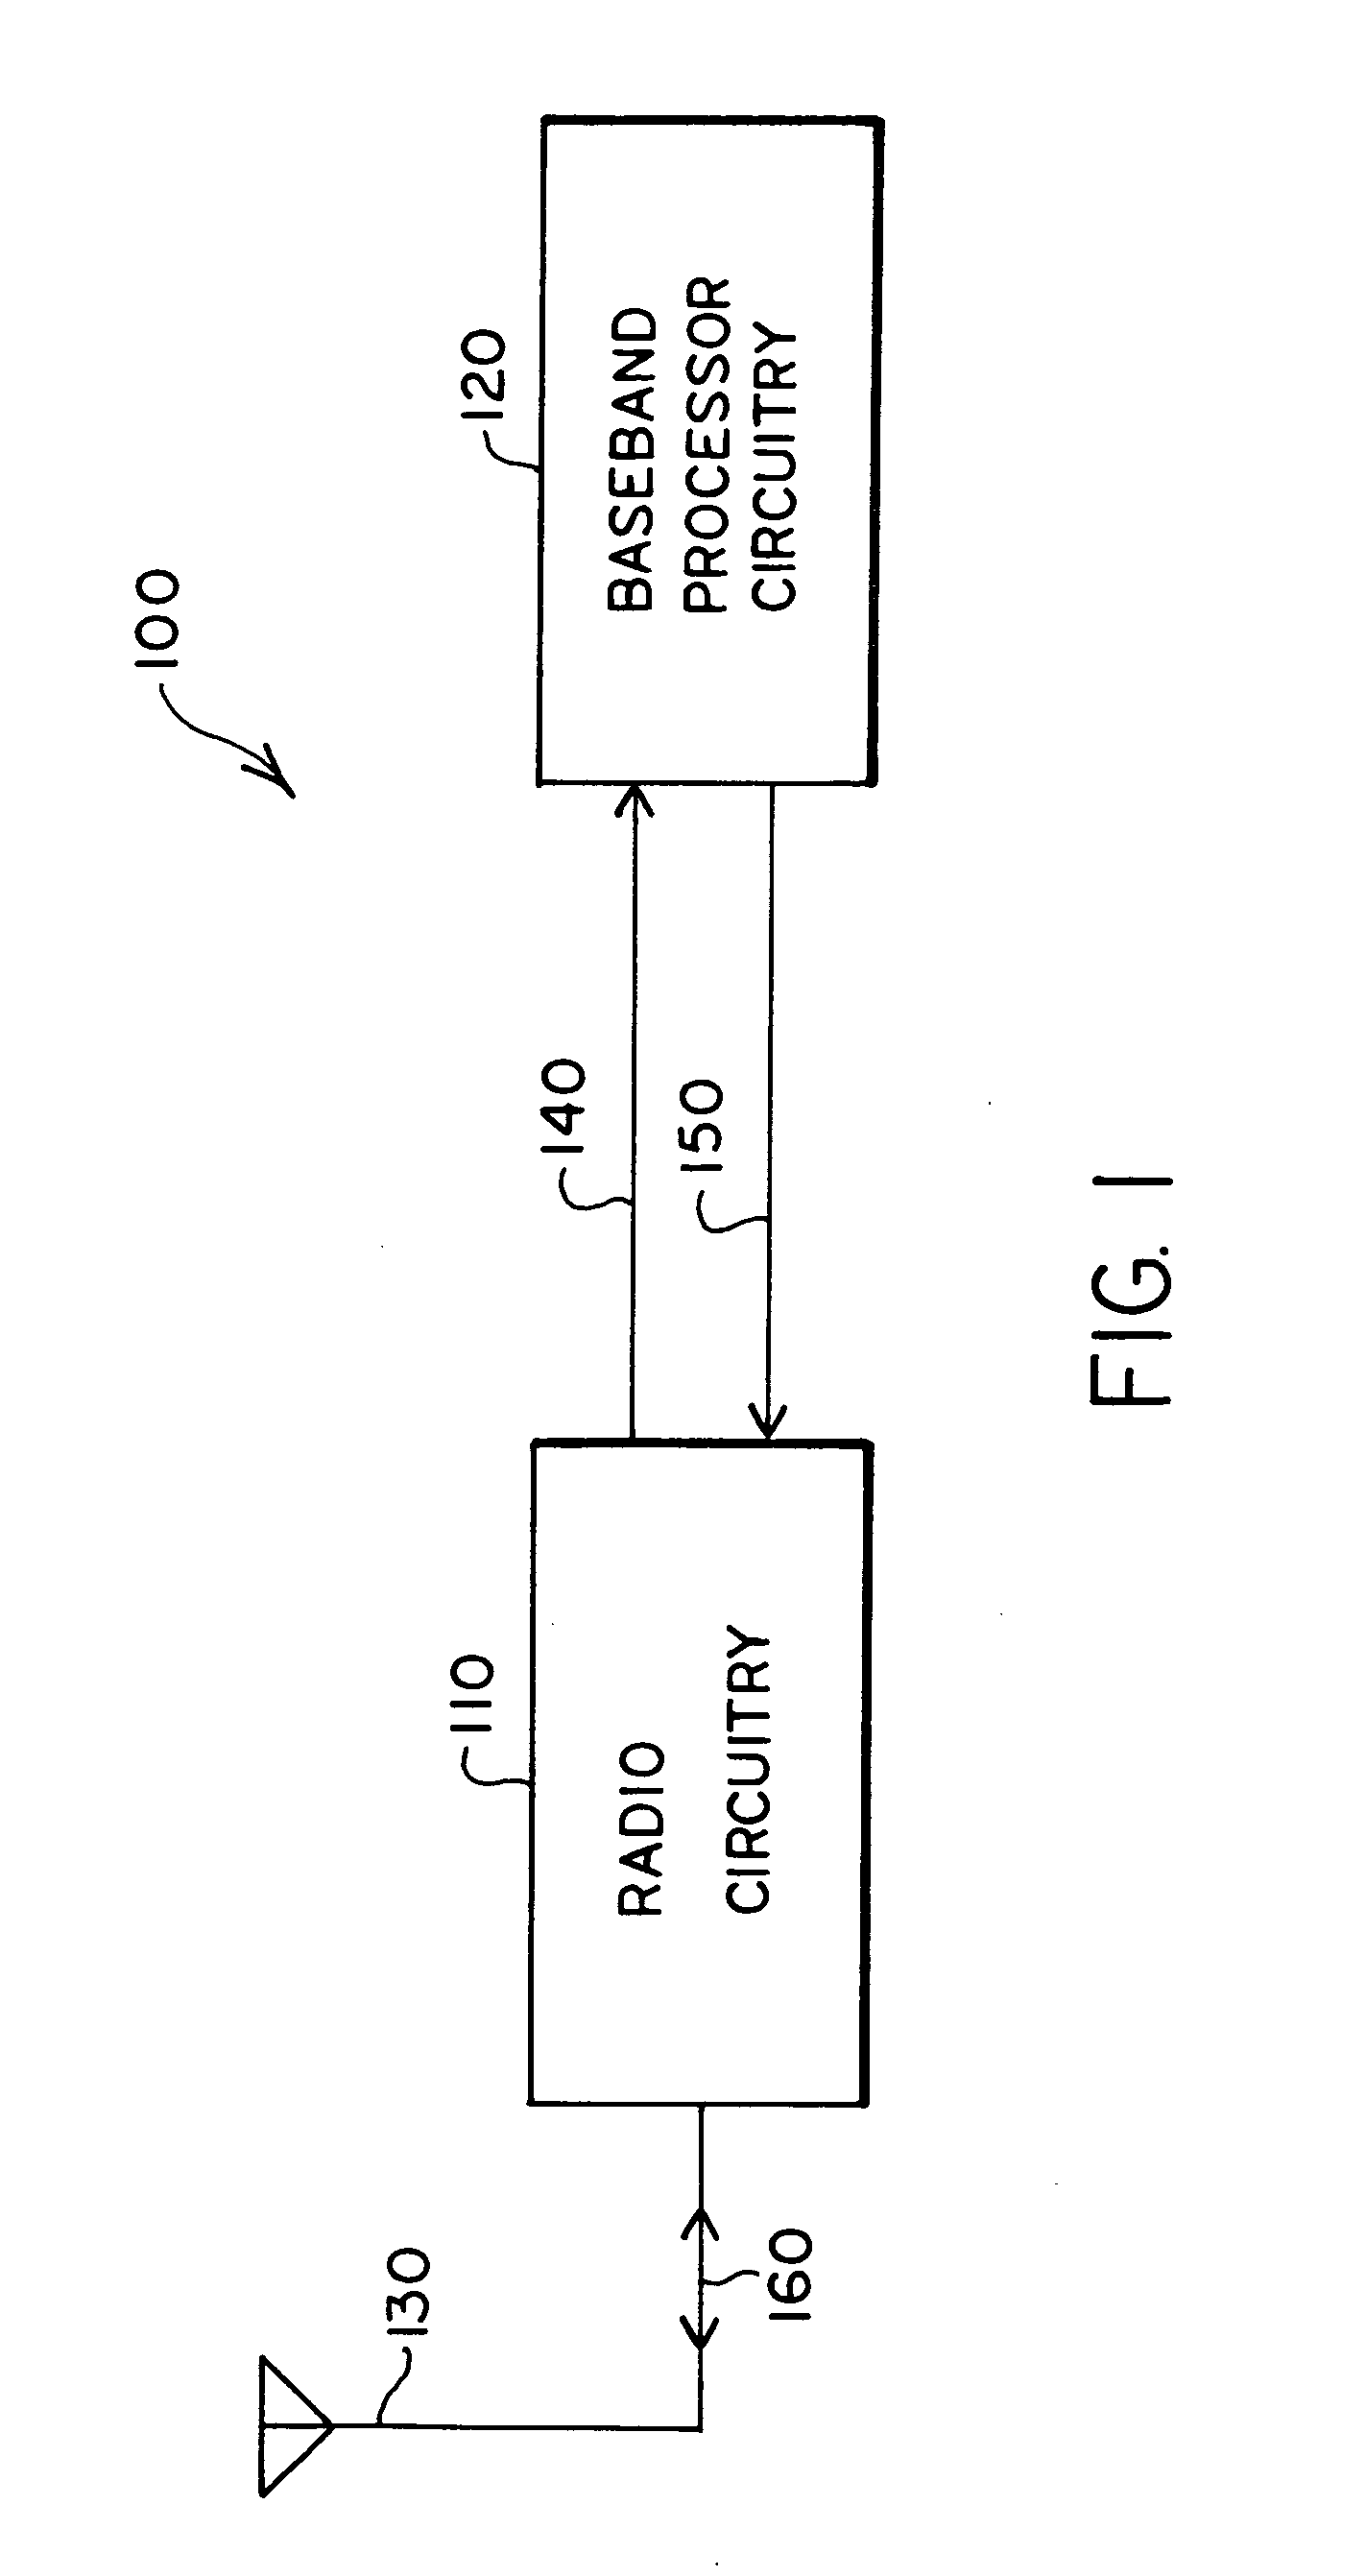 Systems and methods for providing an adjustable reference signal to RF circuitry